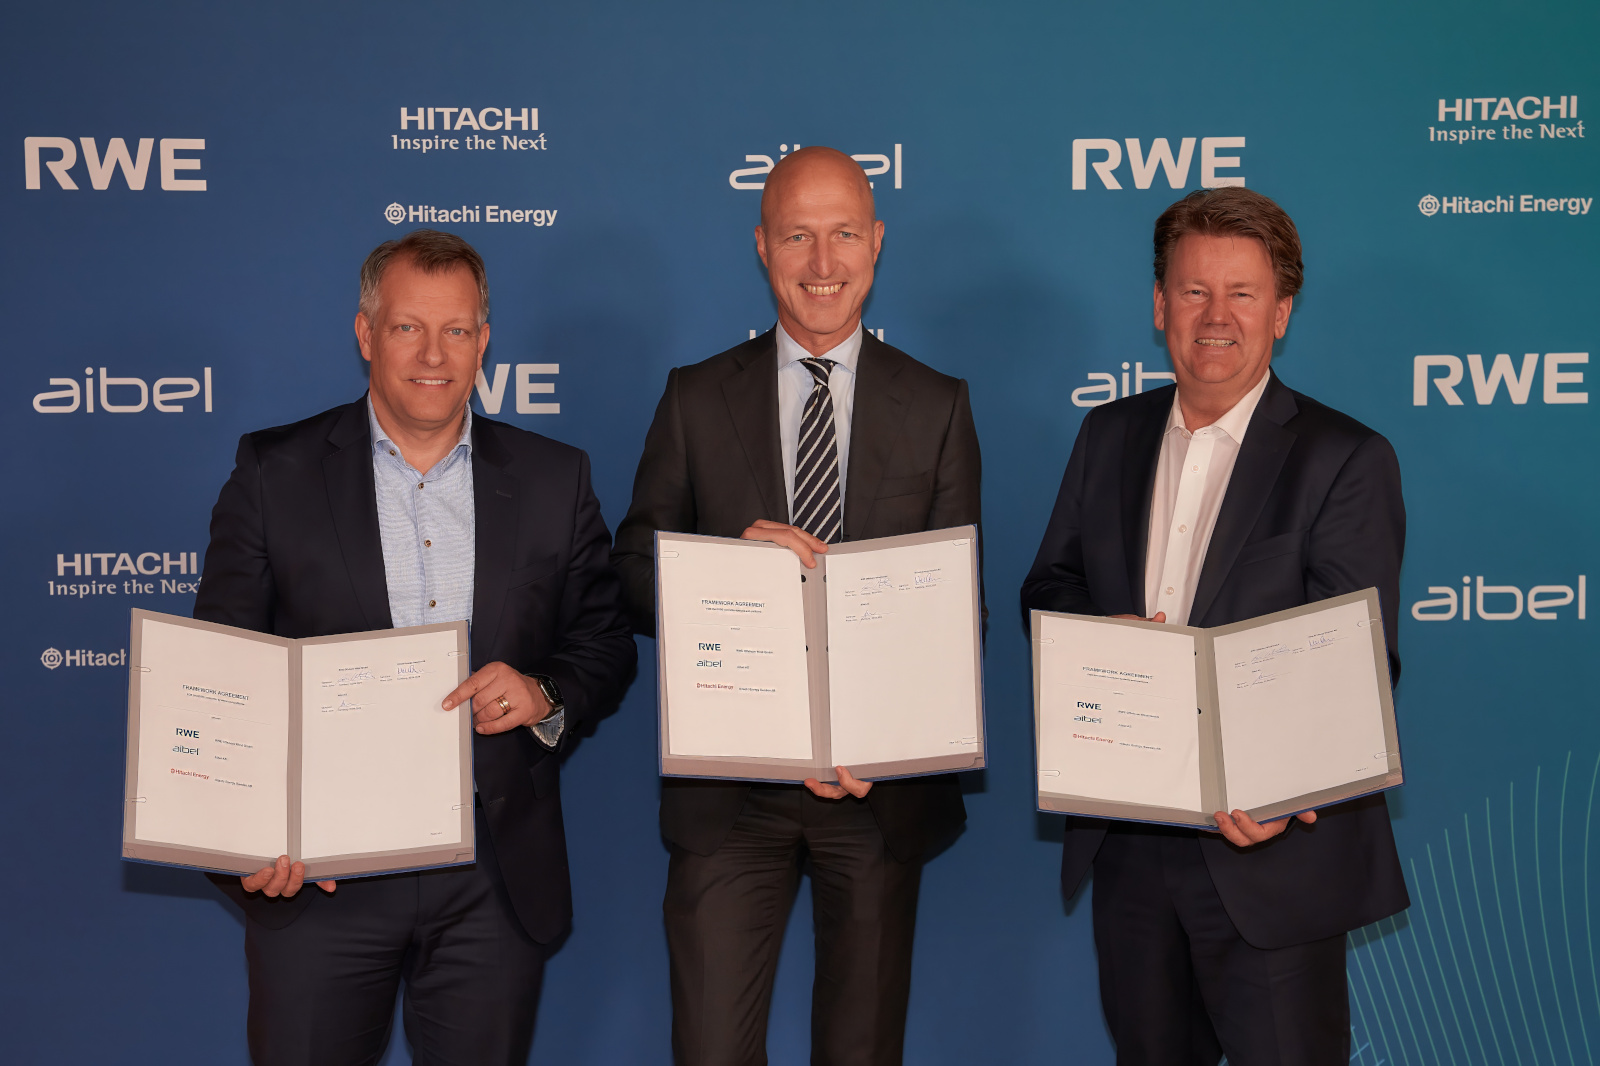 Niklas Persson, Managing Director at Hitachi Energy’s Grid Integration business, Sven Utermöhlen, CEO of RWE Offshore Wind, and Mads Andersen, President and CEO of Aibel